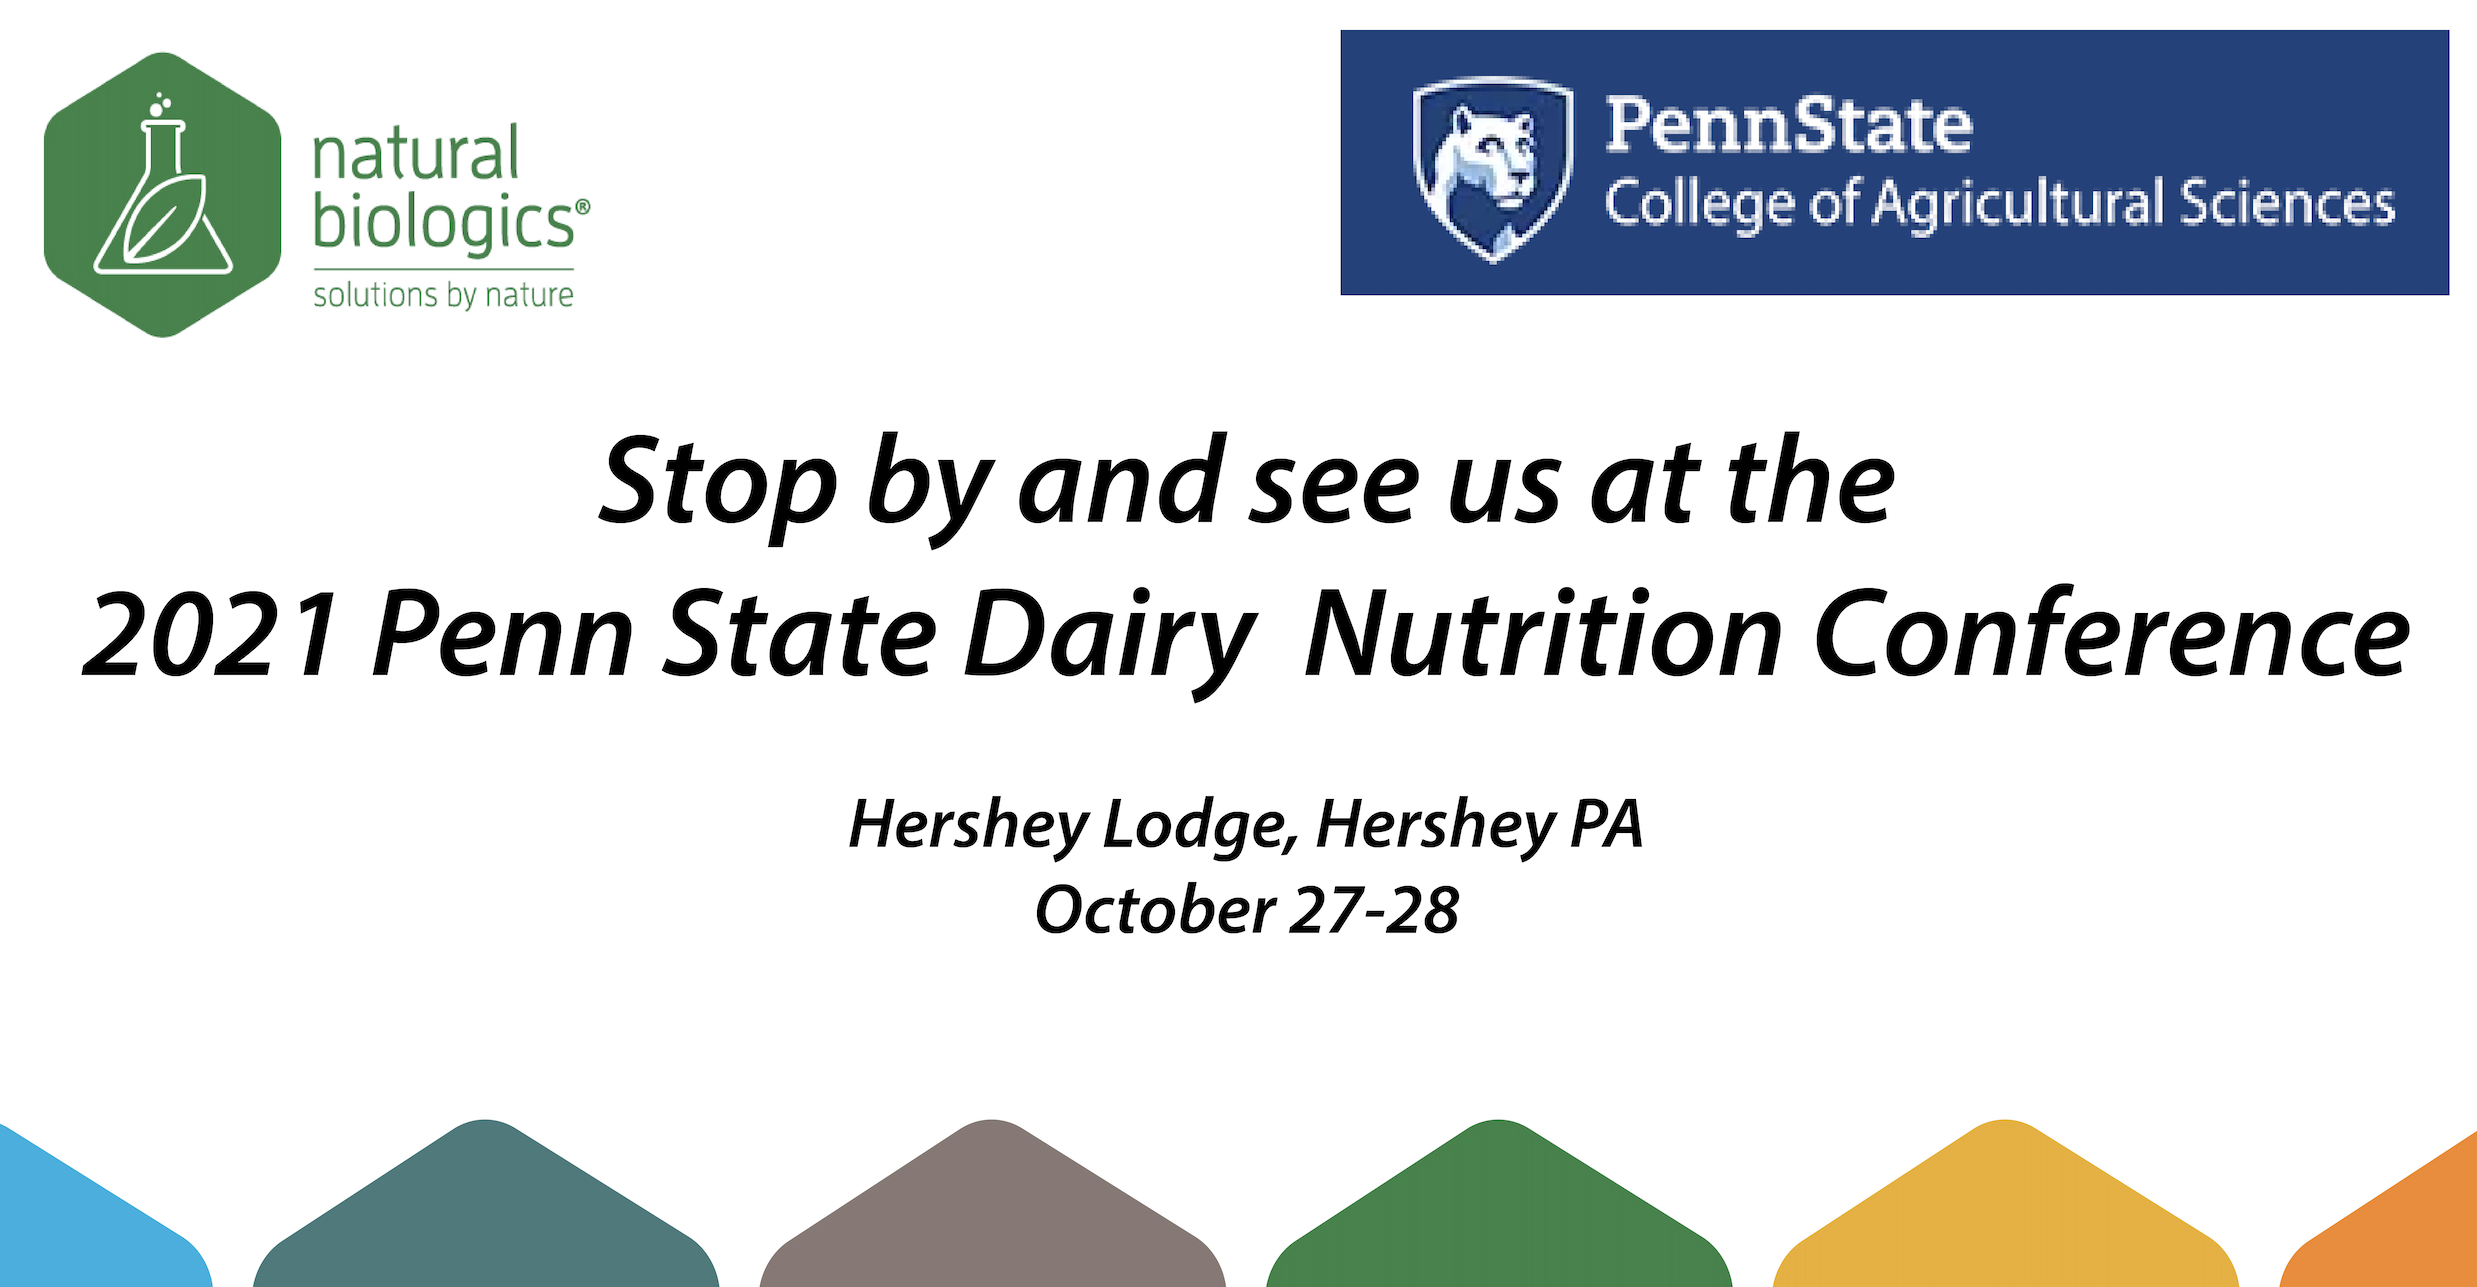 Penn State Dairy Nutrition Conference, Oct 27-28